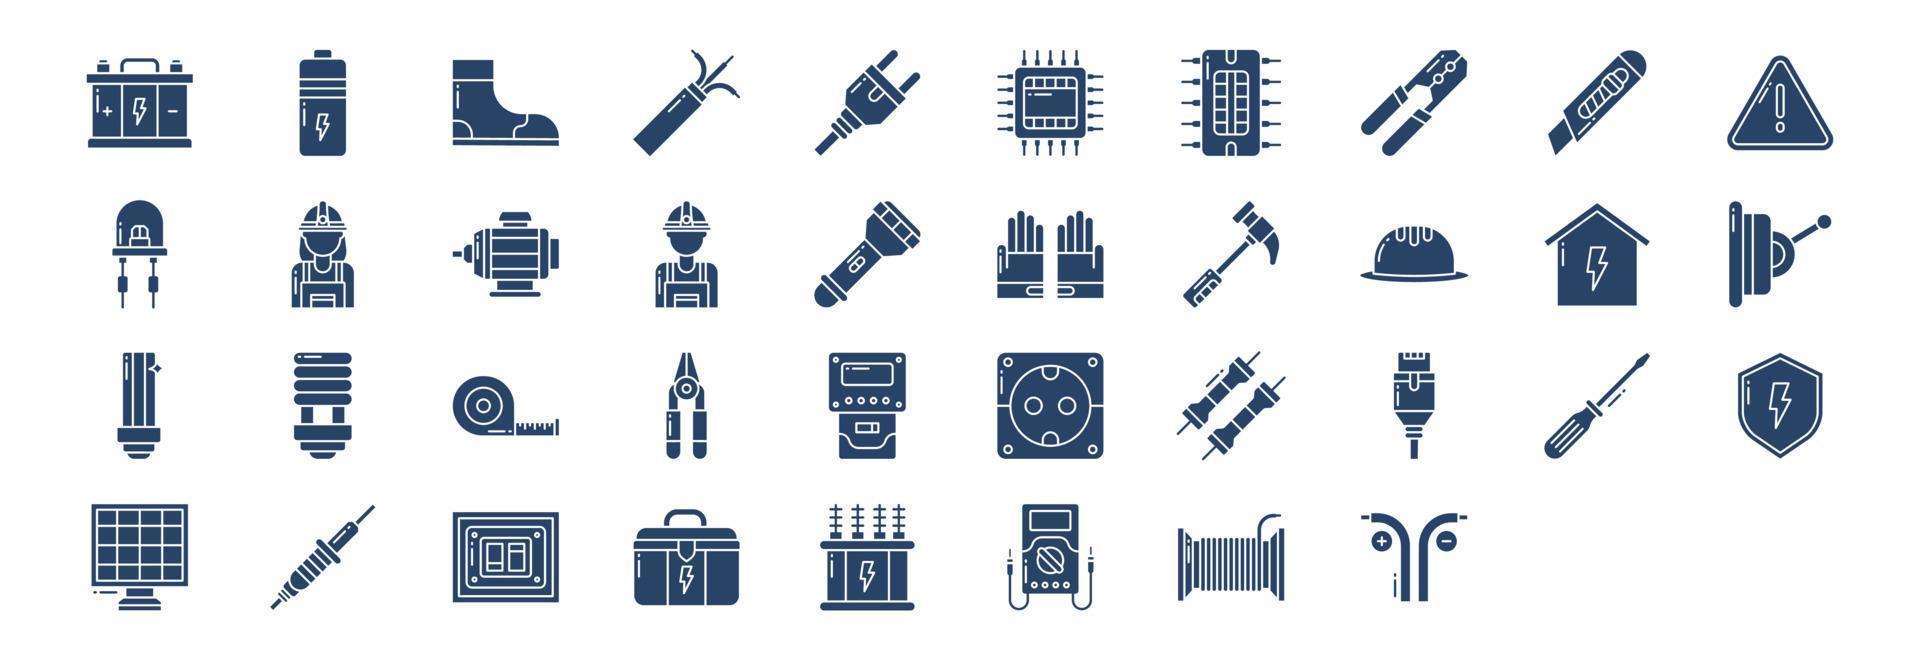 Collection of icons related to Electrician, including icons like Accumulator, Battery, Boots, Cpu and more. vector illustrations, Pixel Perfect set